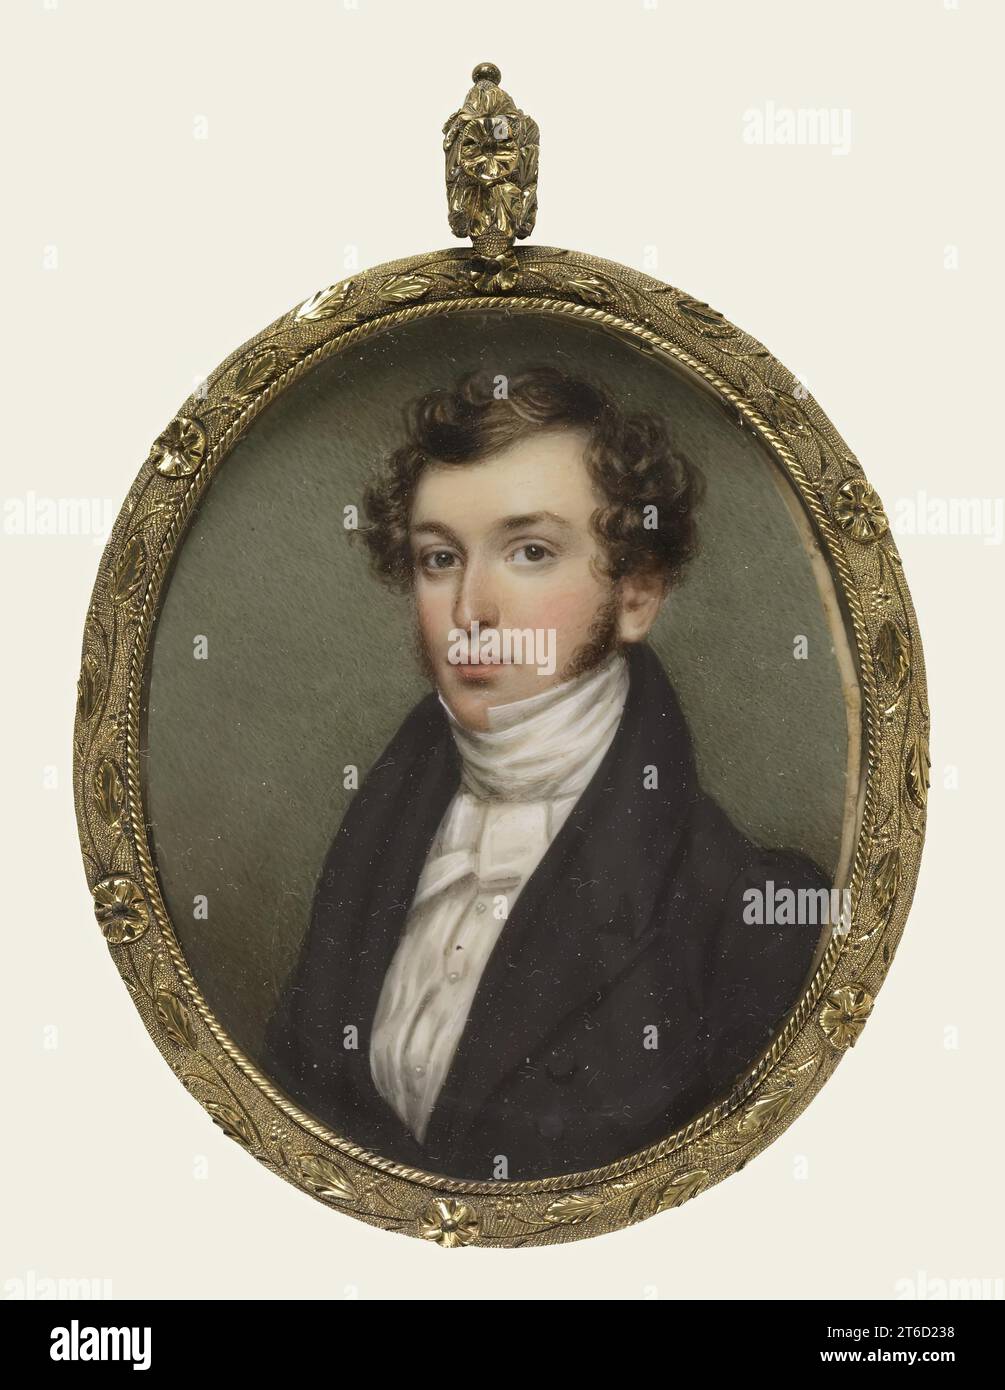 Robert Eden Handy, 1835. Waist-length, three-quarter profile portrait of a man with wavy brown hair parted on the left, and side whiskers, wearing a black coat, white shirt, high white collar and white stock. The miniature is mounted in a gold, oval frame, with a braid of hair under glass on the reverse. Attributed to Asher Brown Durand. Stock Photo